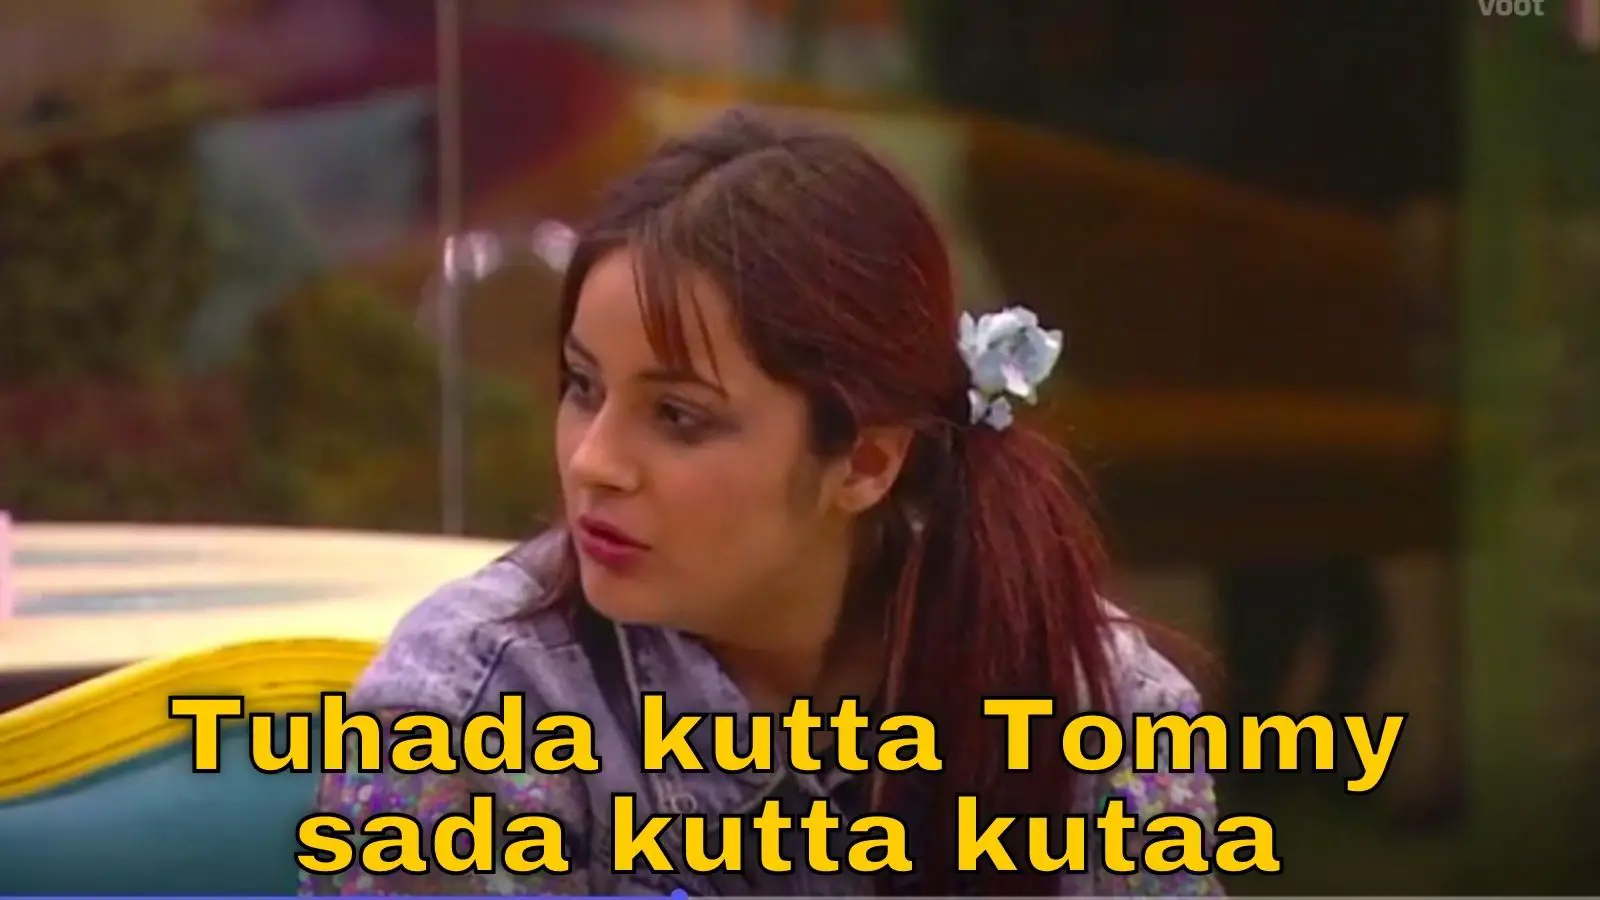 Tuada Kutta Tommy - Meme Meaning And Origin Explained